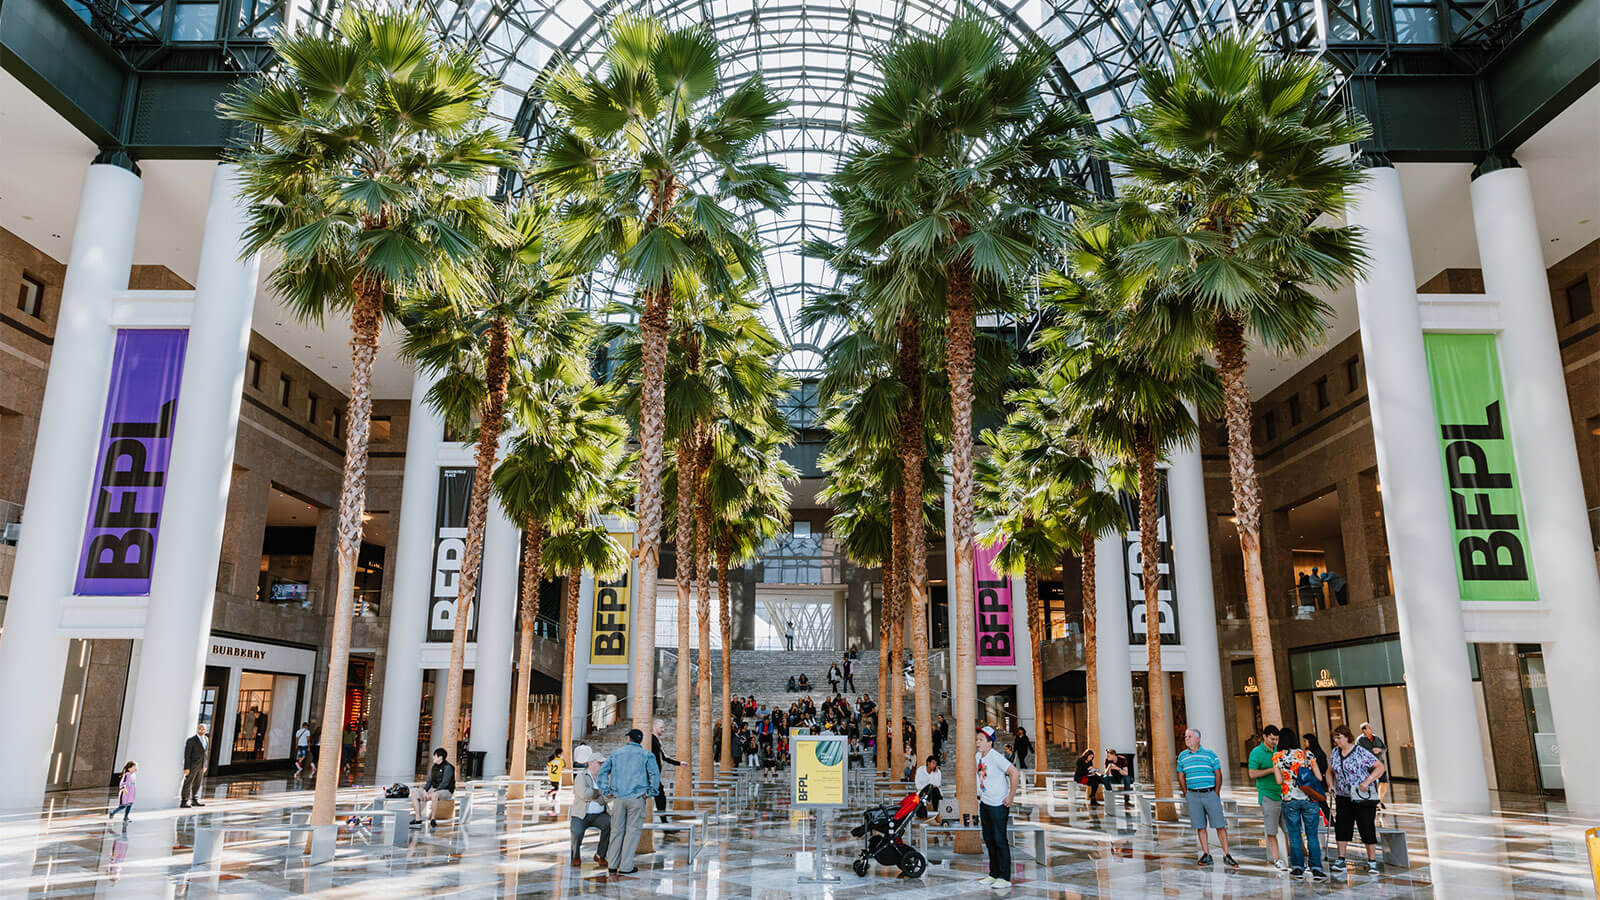 The Winter Garden at BFPL showcasing their giant palm trees and shoppers abound